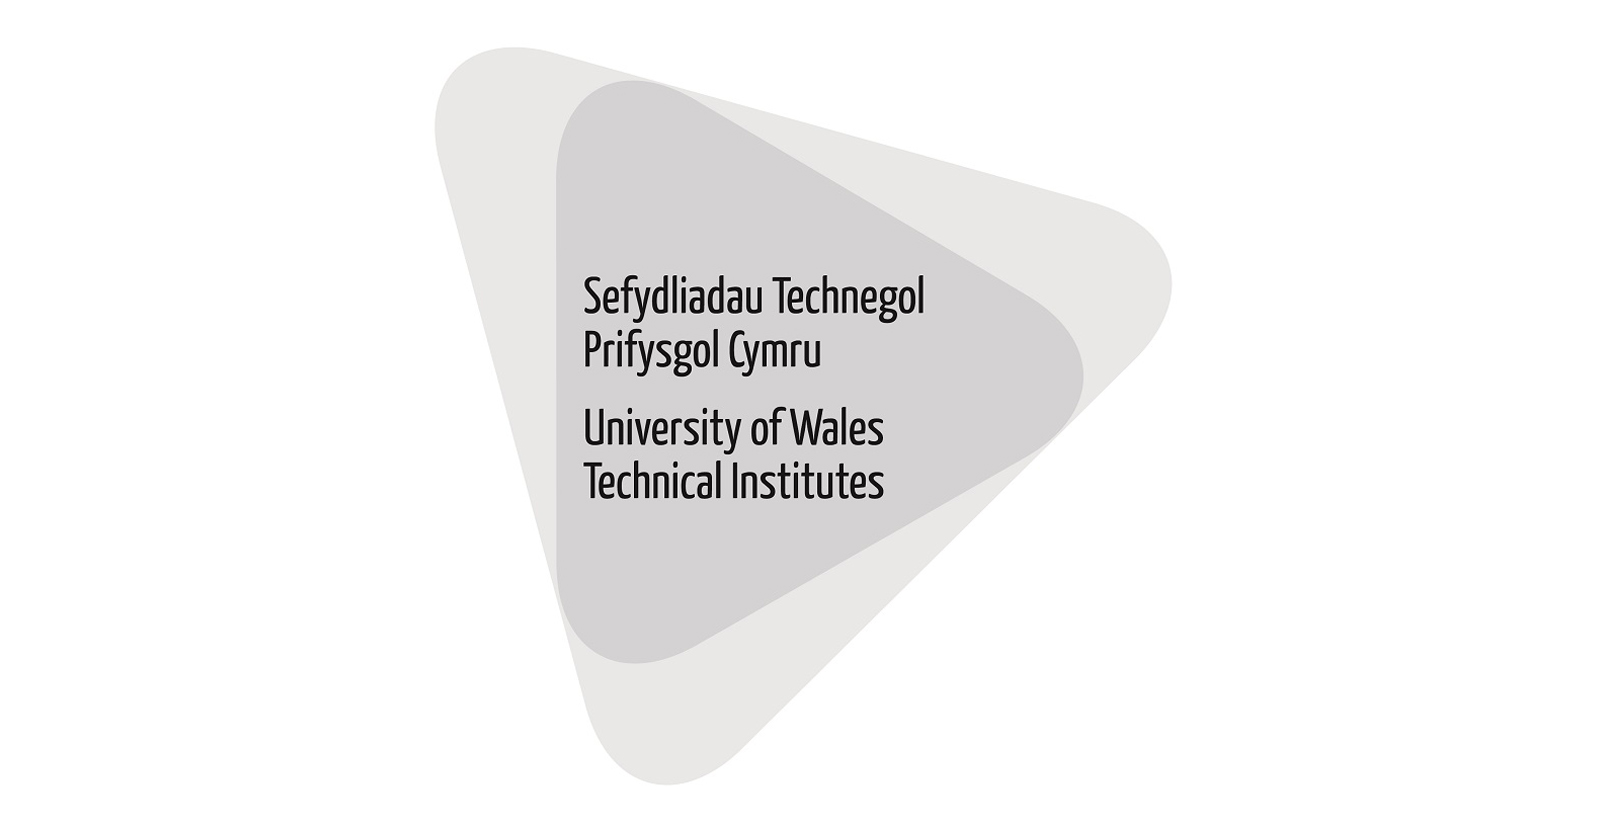 University of Wales Technical Institutes greyscale logo